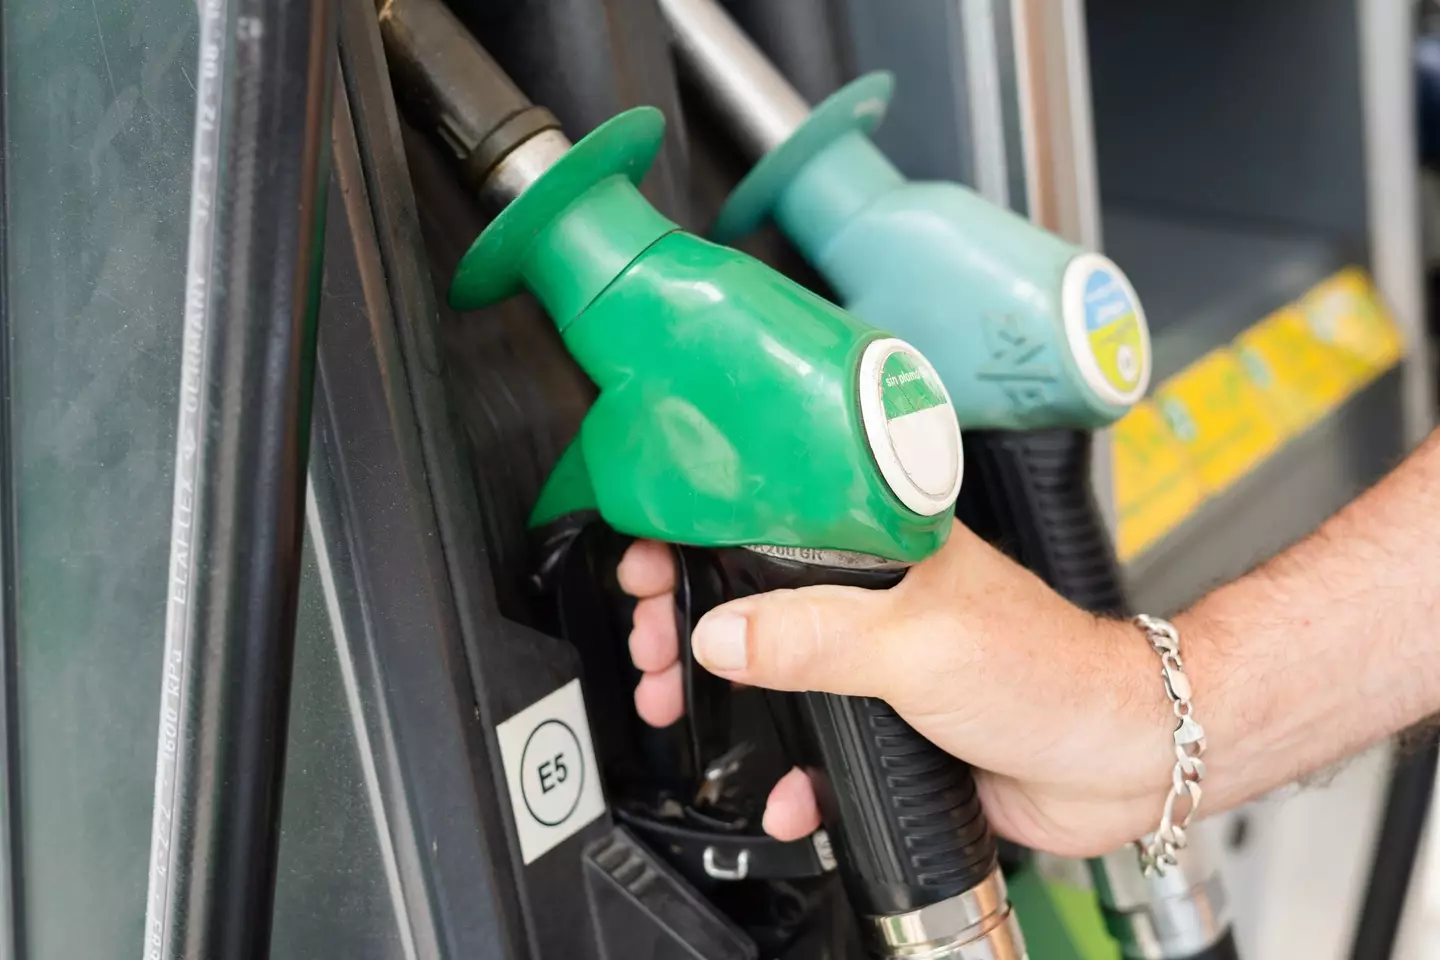 Drivers are being urged to buy fuel as soon as possible. (Getty Stock Image)